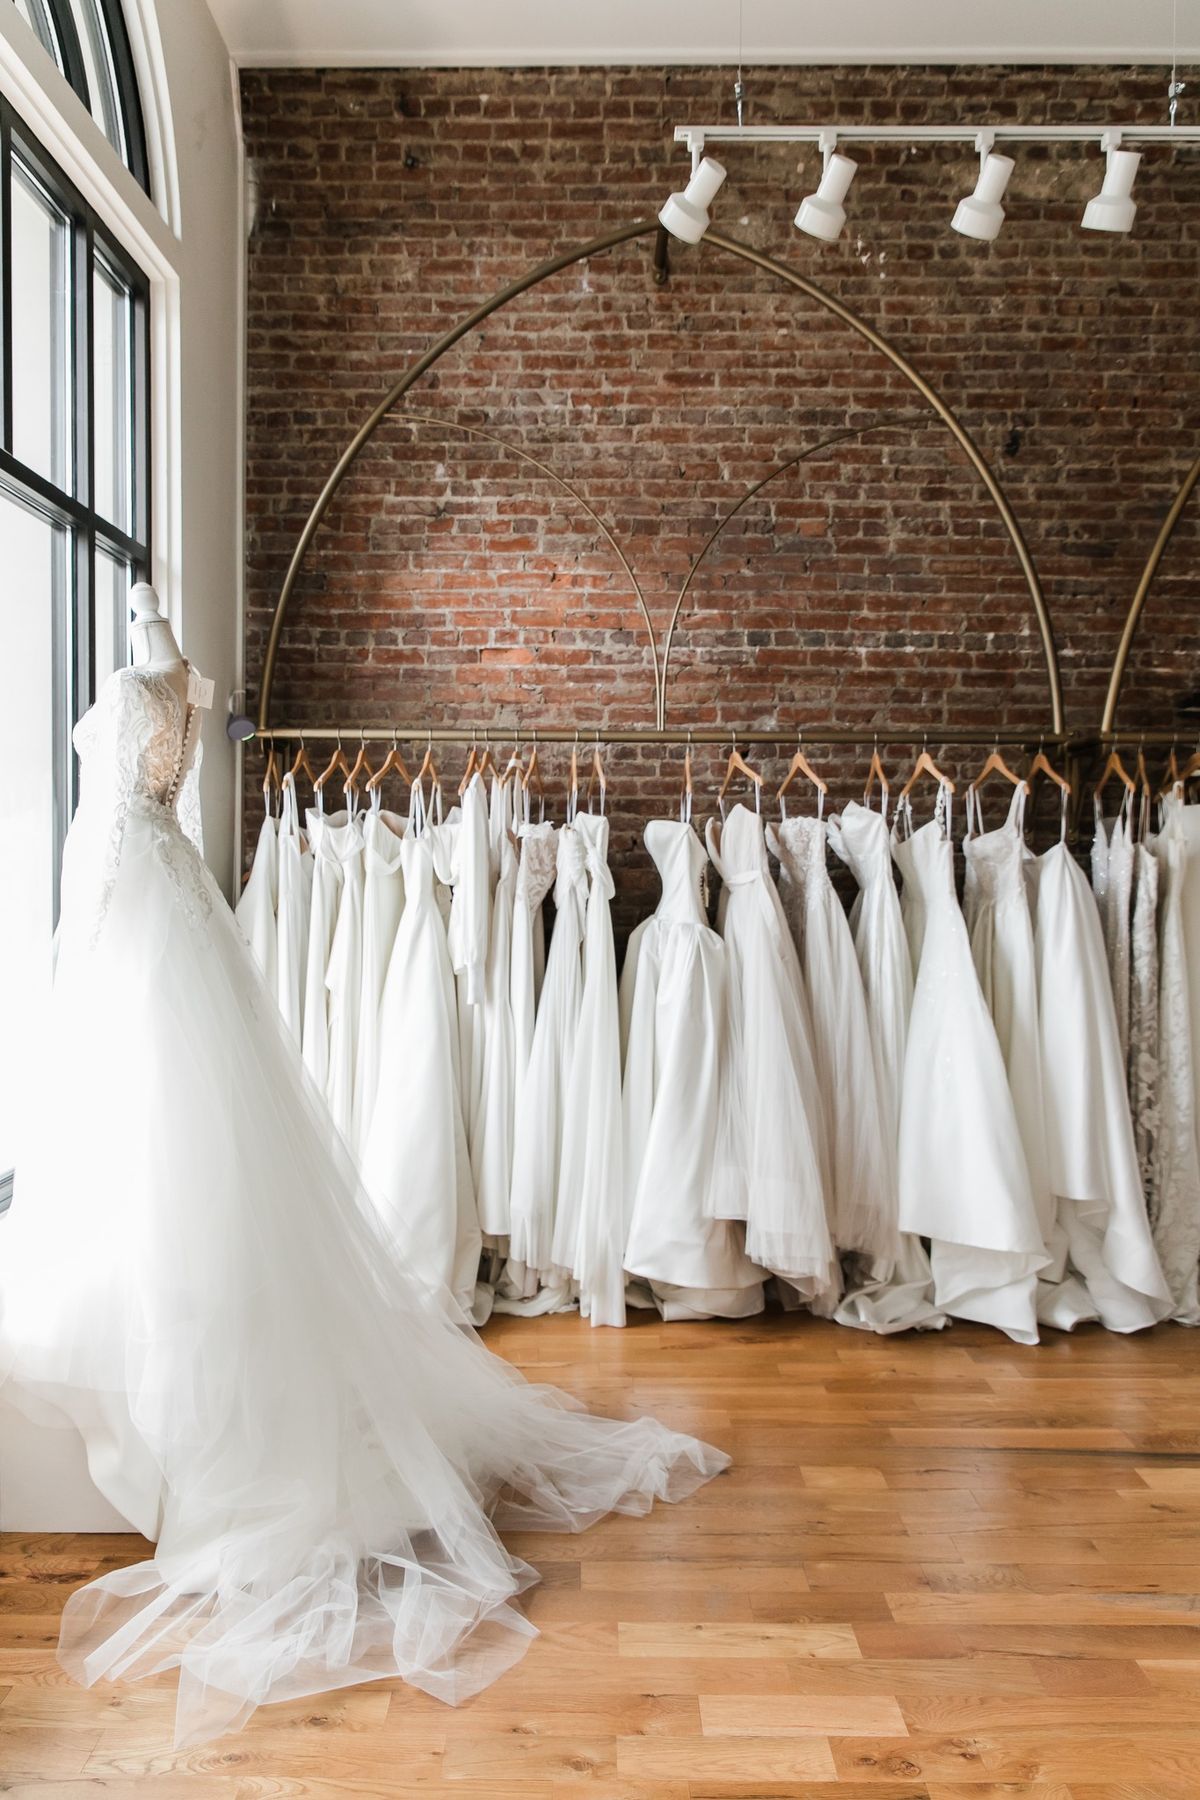 7th Annual Sample Sale | Designer Gowns $799-$1899